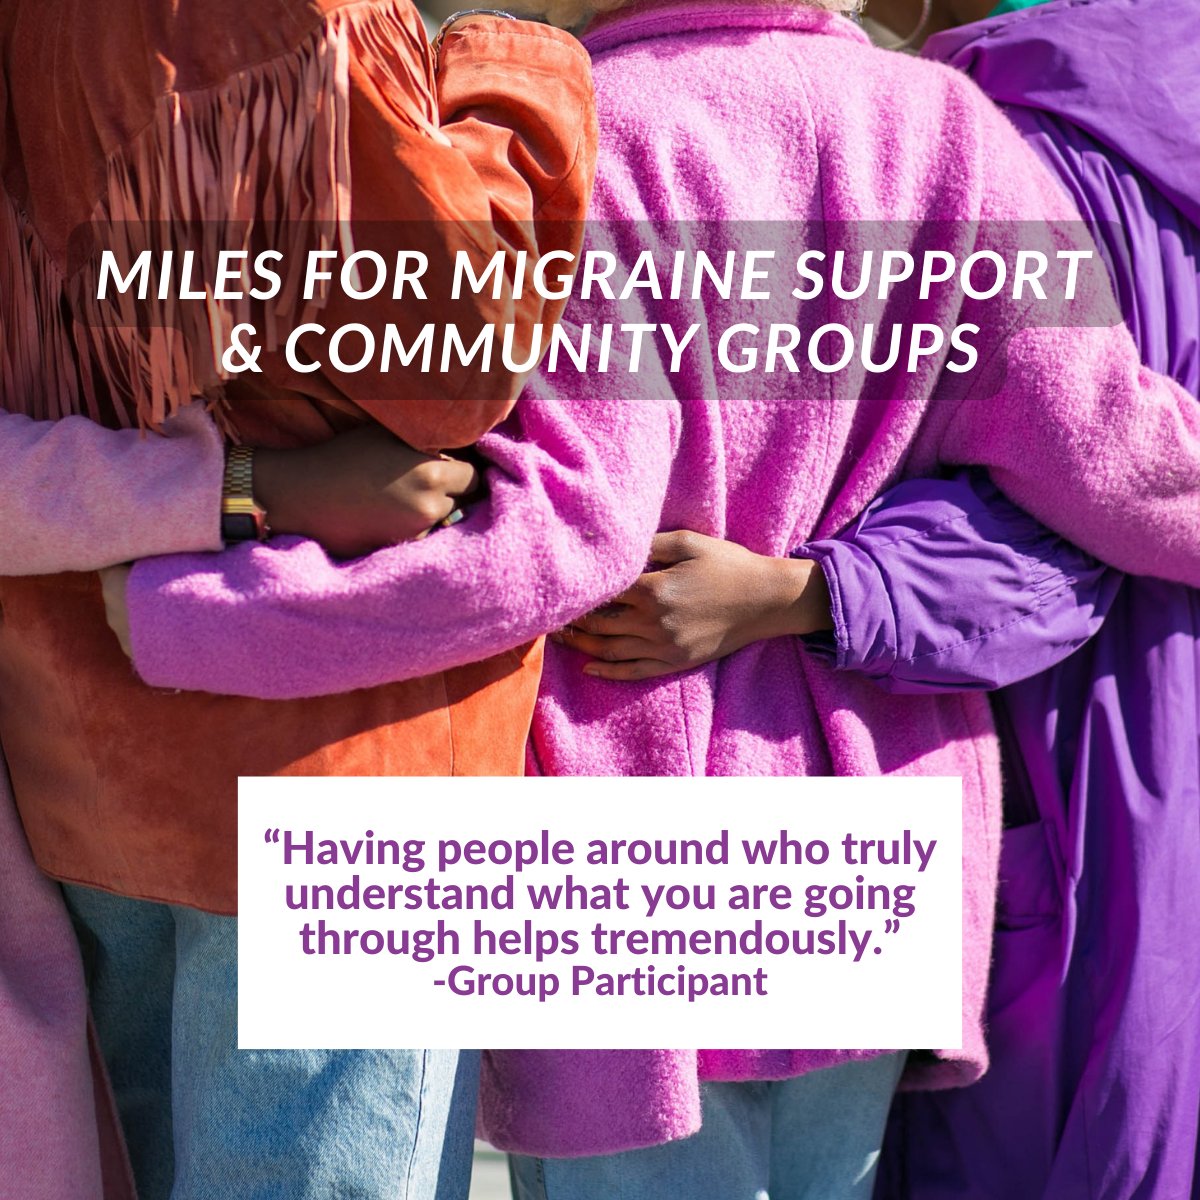 Looking for support in your journey with migraine? Did you know we offer virtual support and community group meetings 6 days a week? Free sign up/info: milesformigraine.org/migraine-suppo…